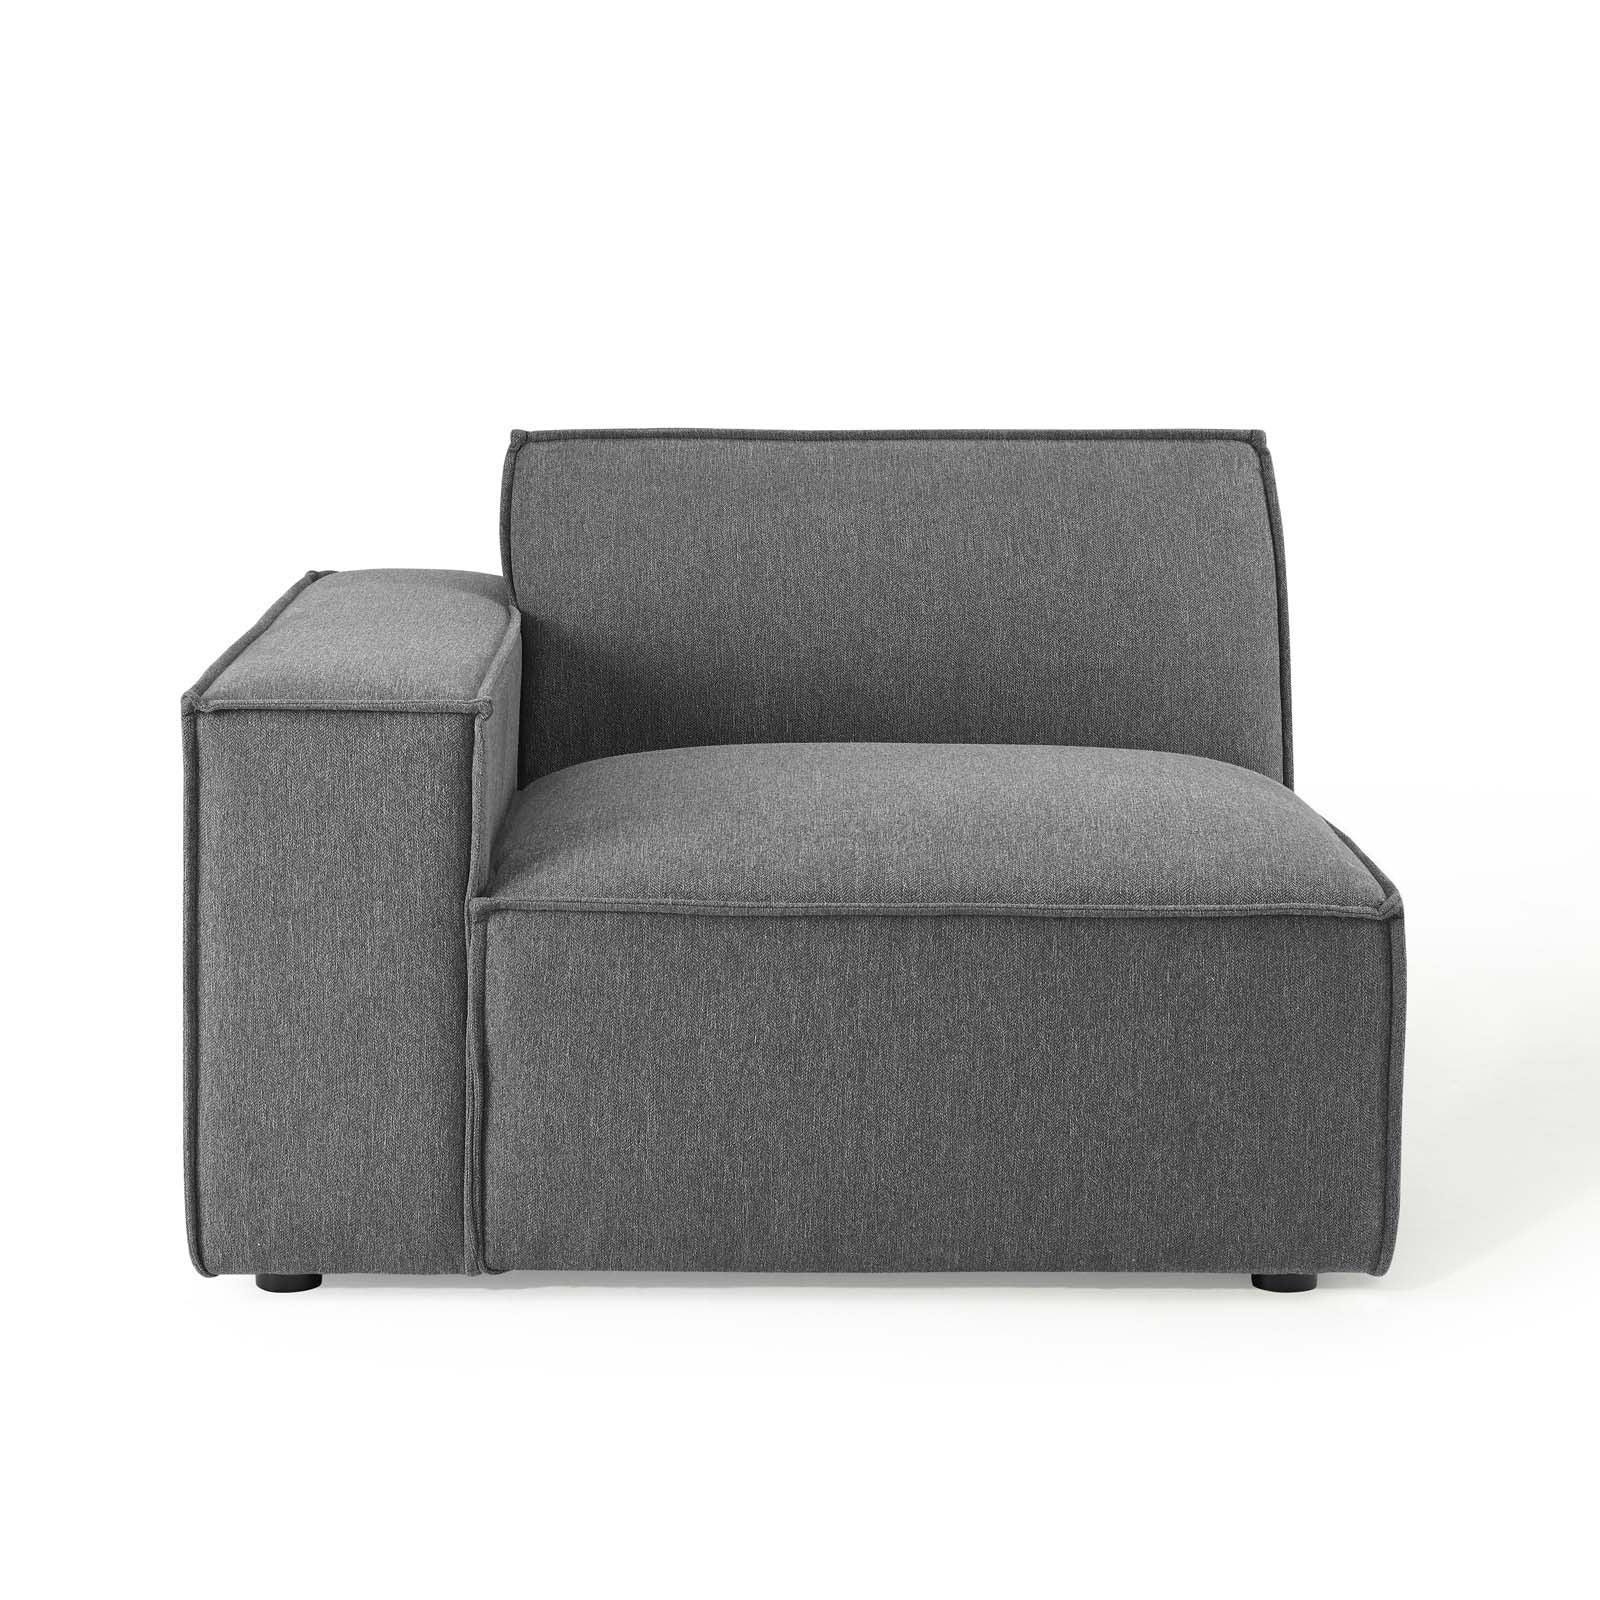 Modway Accent Chairs - Restore Left-Arm Sectional Chair Charcoal